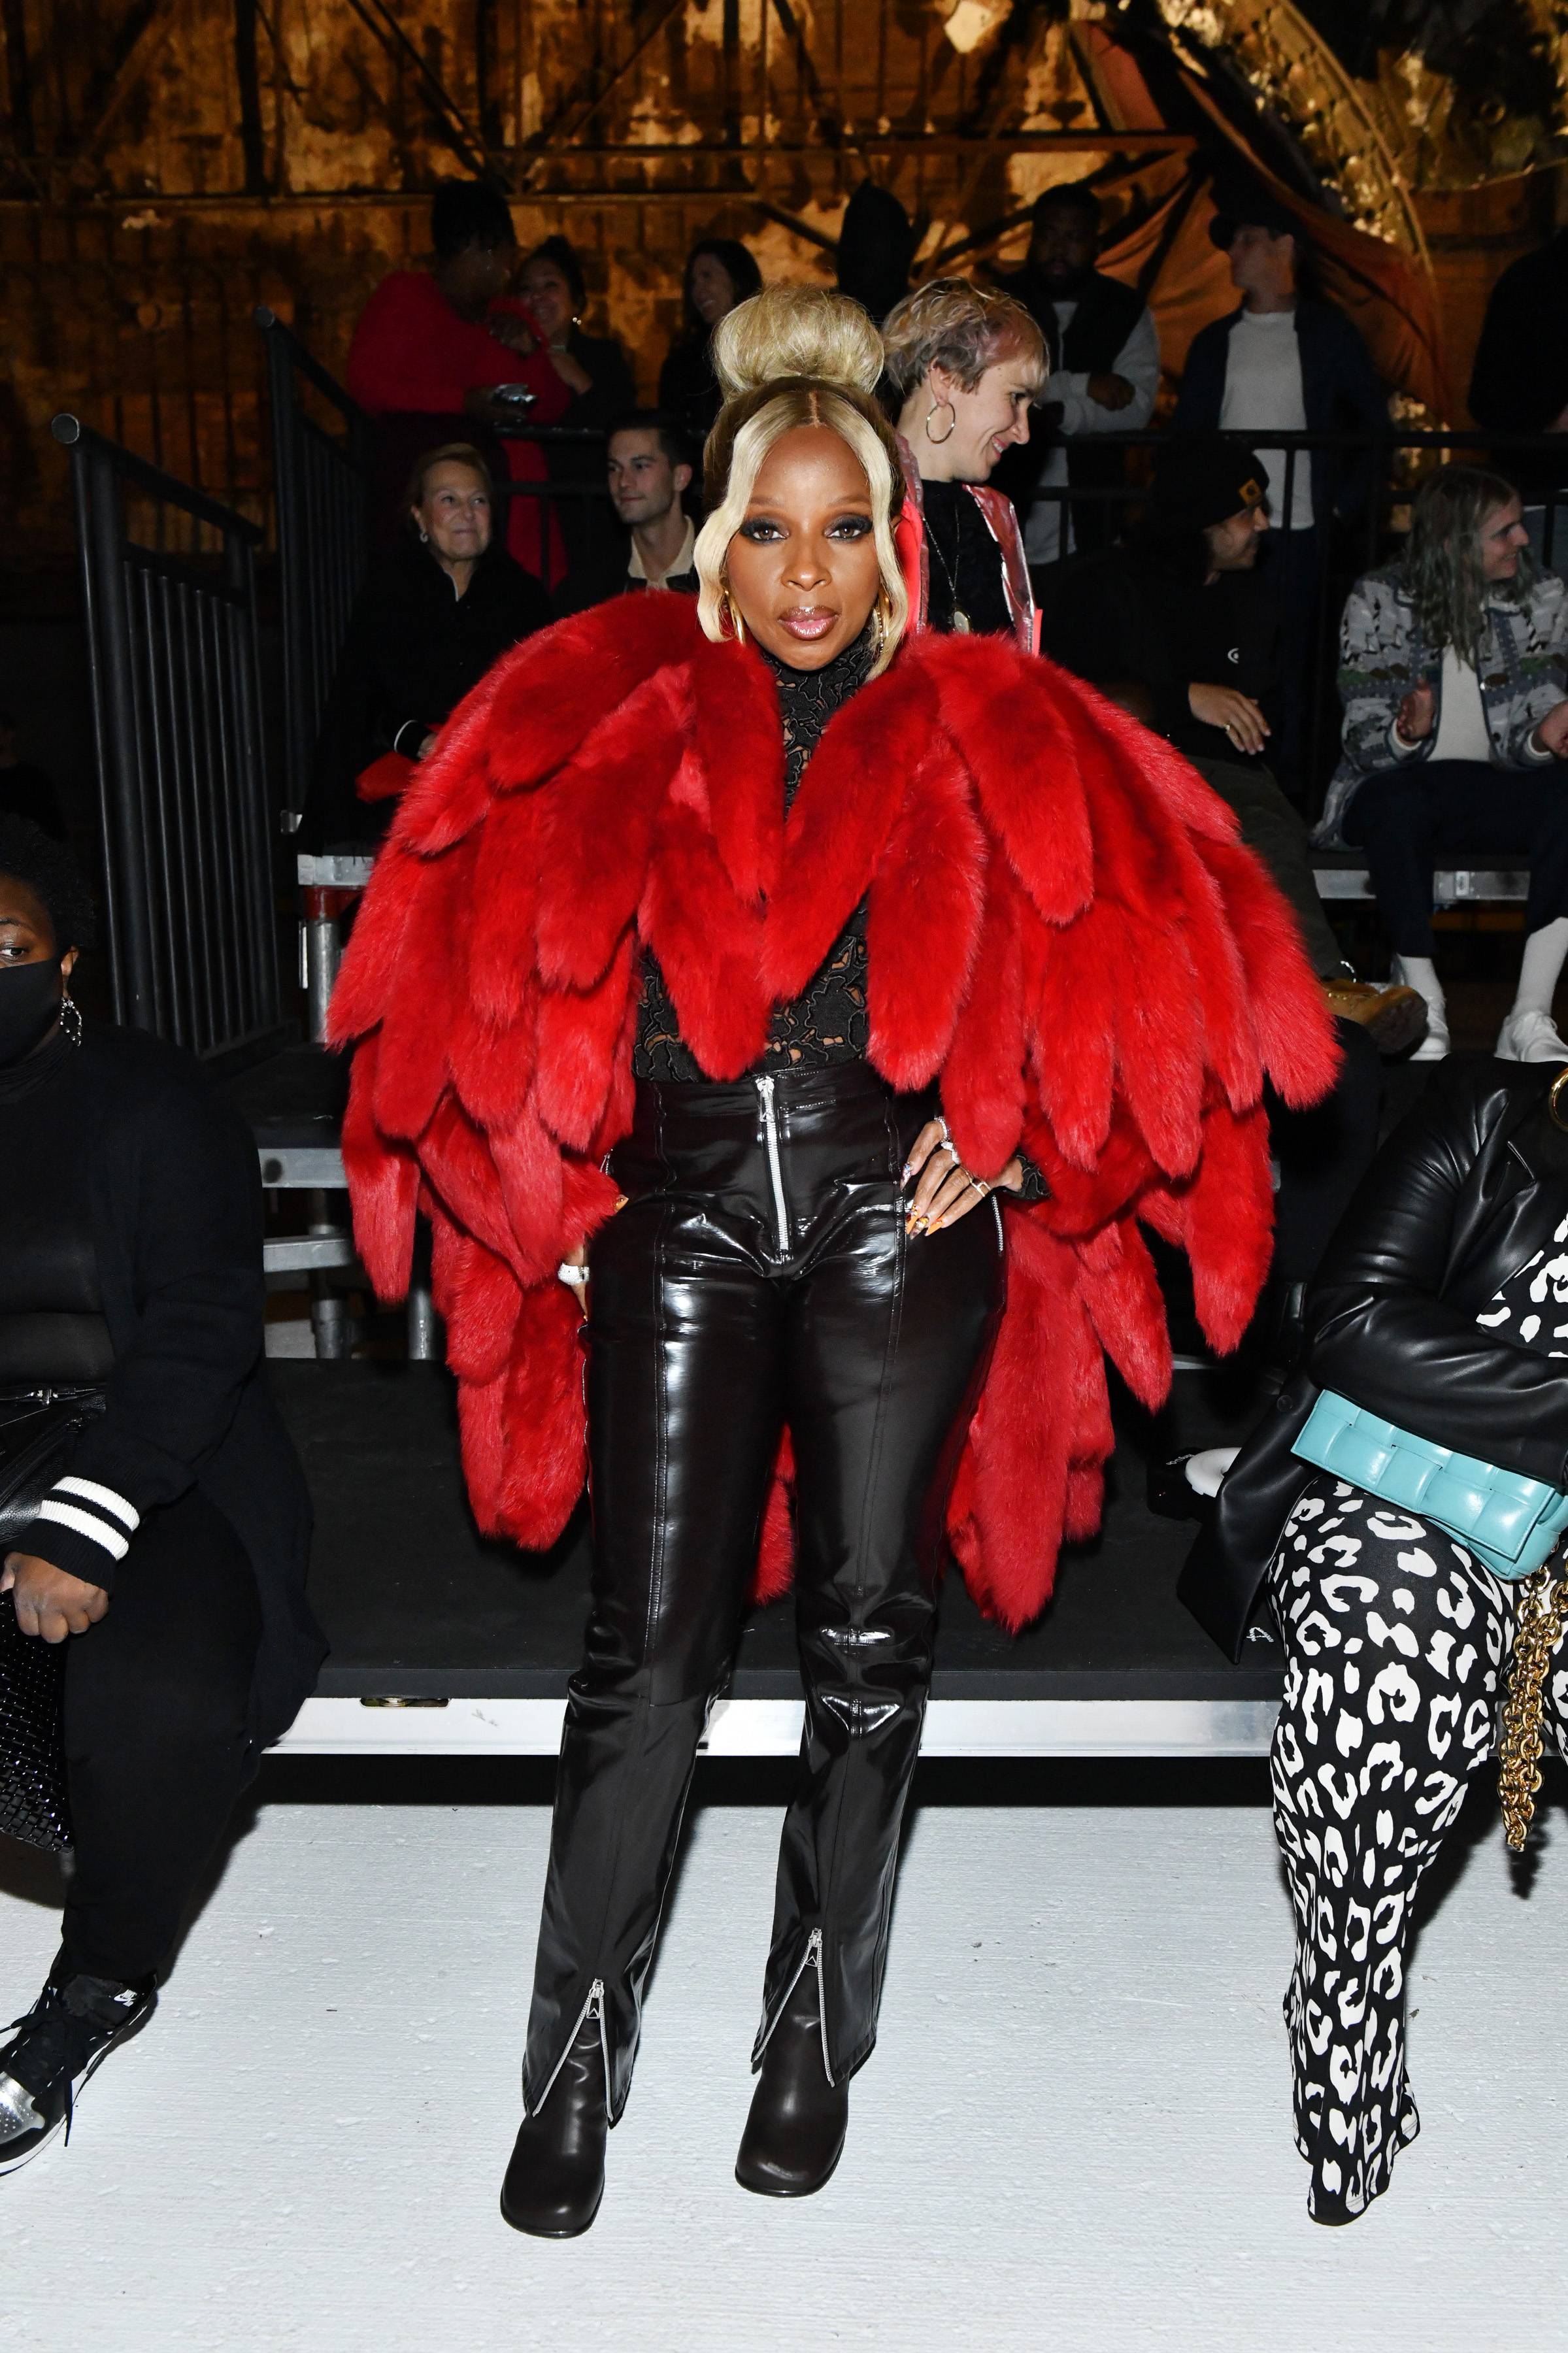 Event: @therealmaryjblige - Mary J. Blige Fashion Book